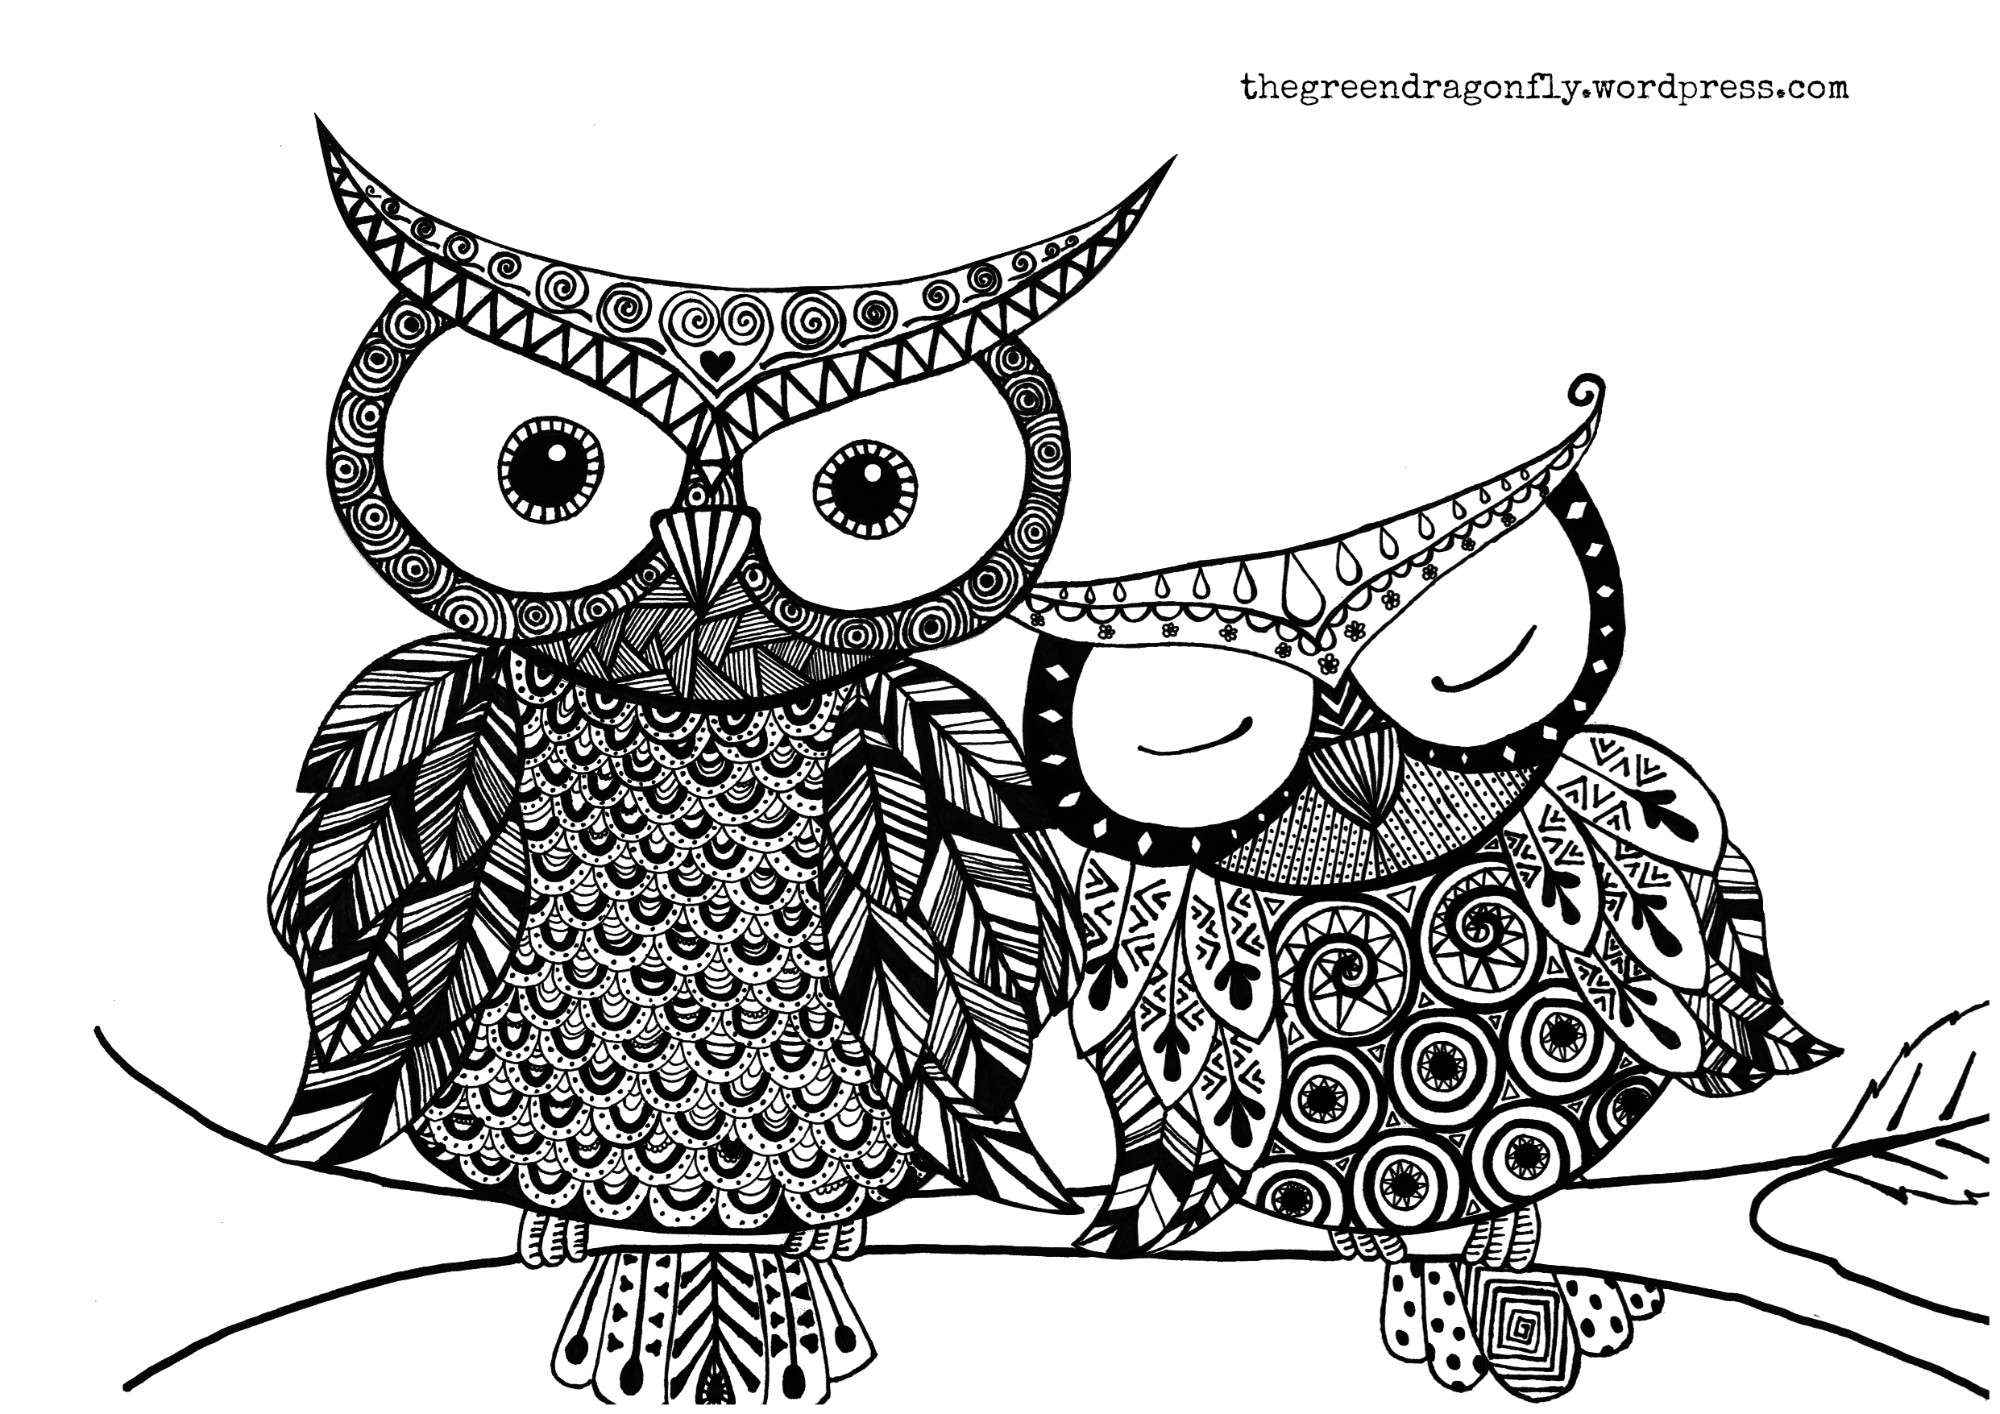 Printable Owl Coloring Pages For Adults
 Owl coloring page – The Green Dragonfly